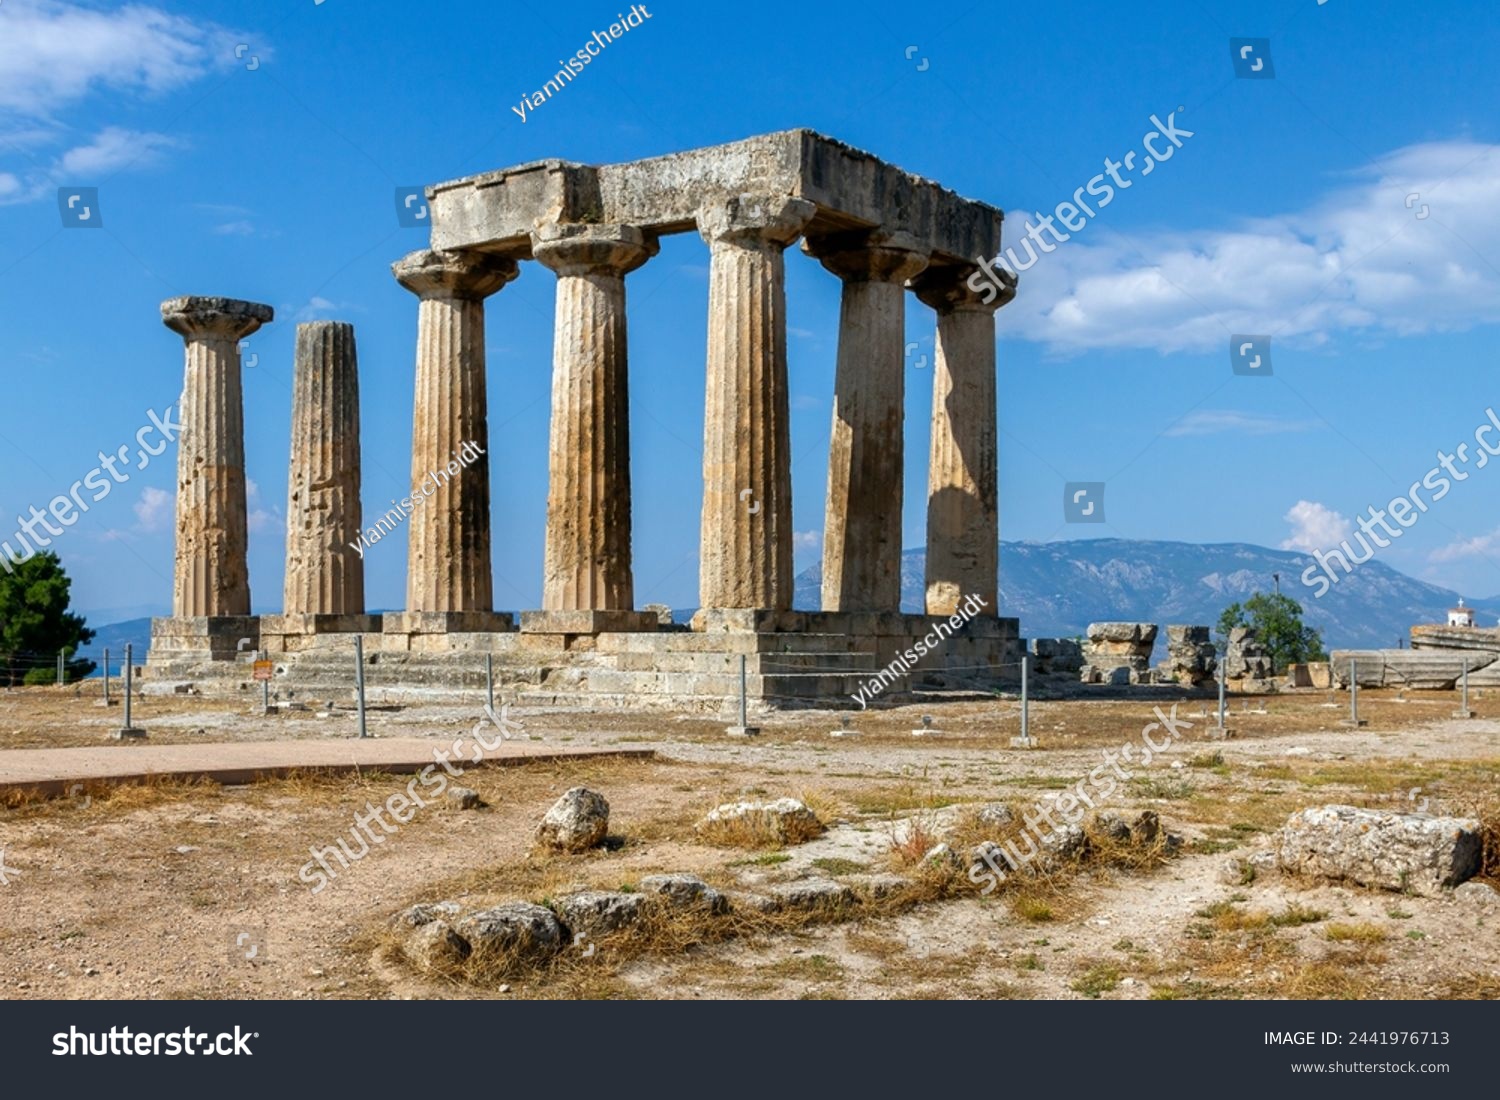 The archaic temple of Apollo, in ancient Corinth, Greece. It was built with monolithid doric columns, around 530 BC. #2441976713